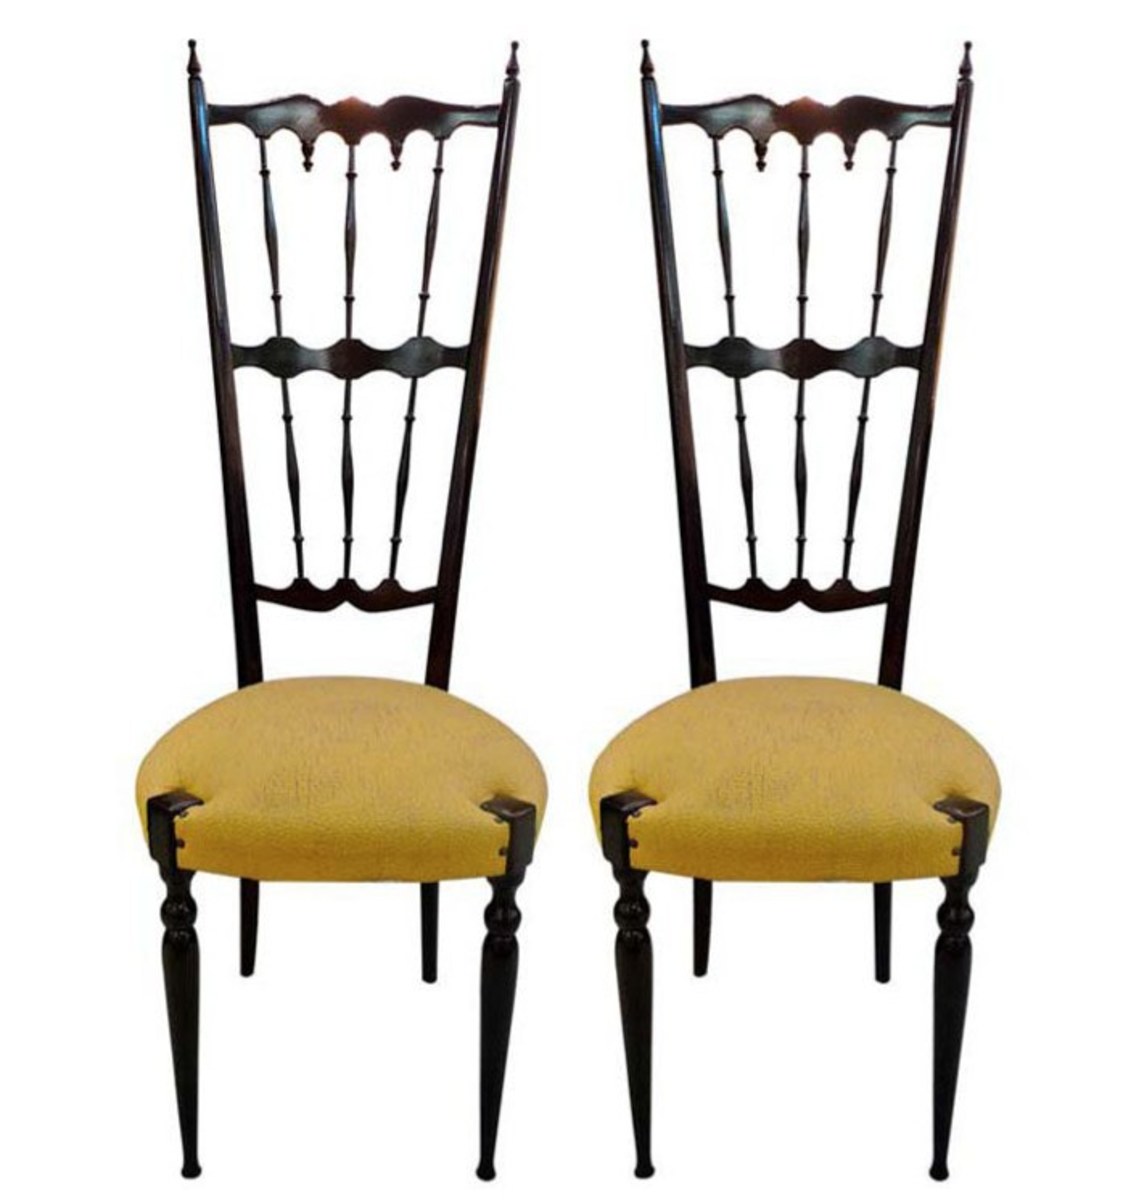 chiavari-chairs-history-of-a-beautiful-chair-throughout-the-ages